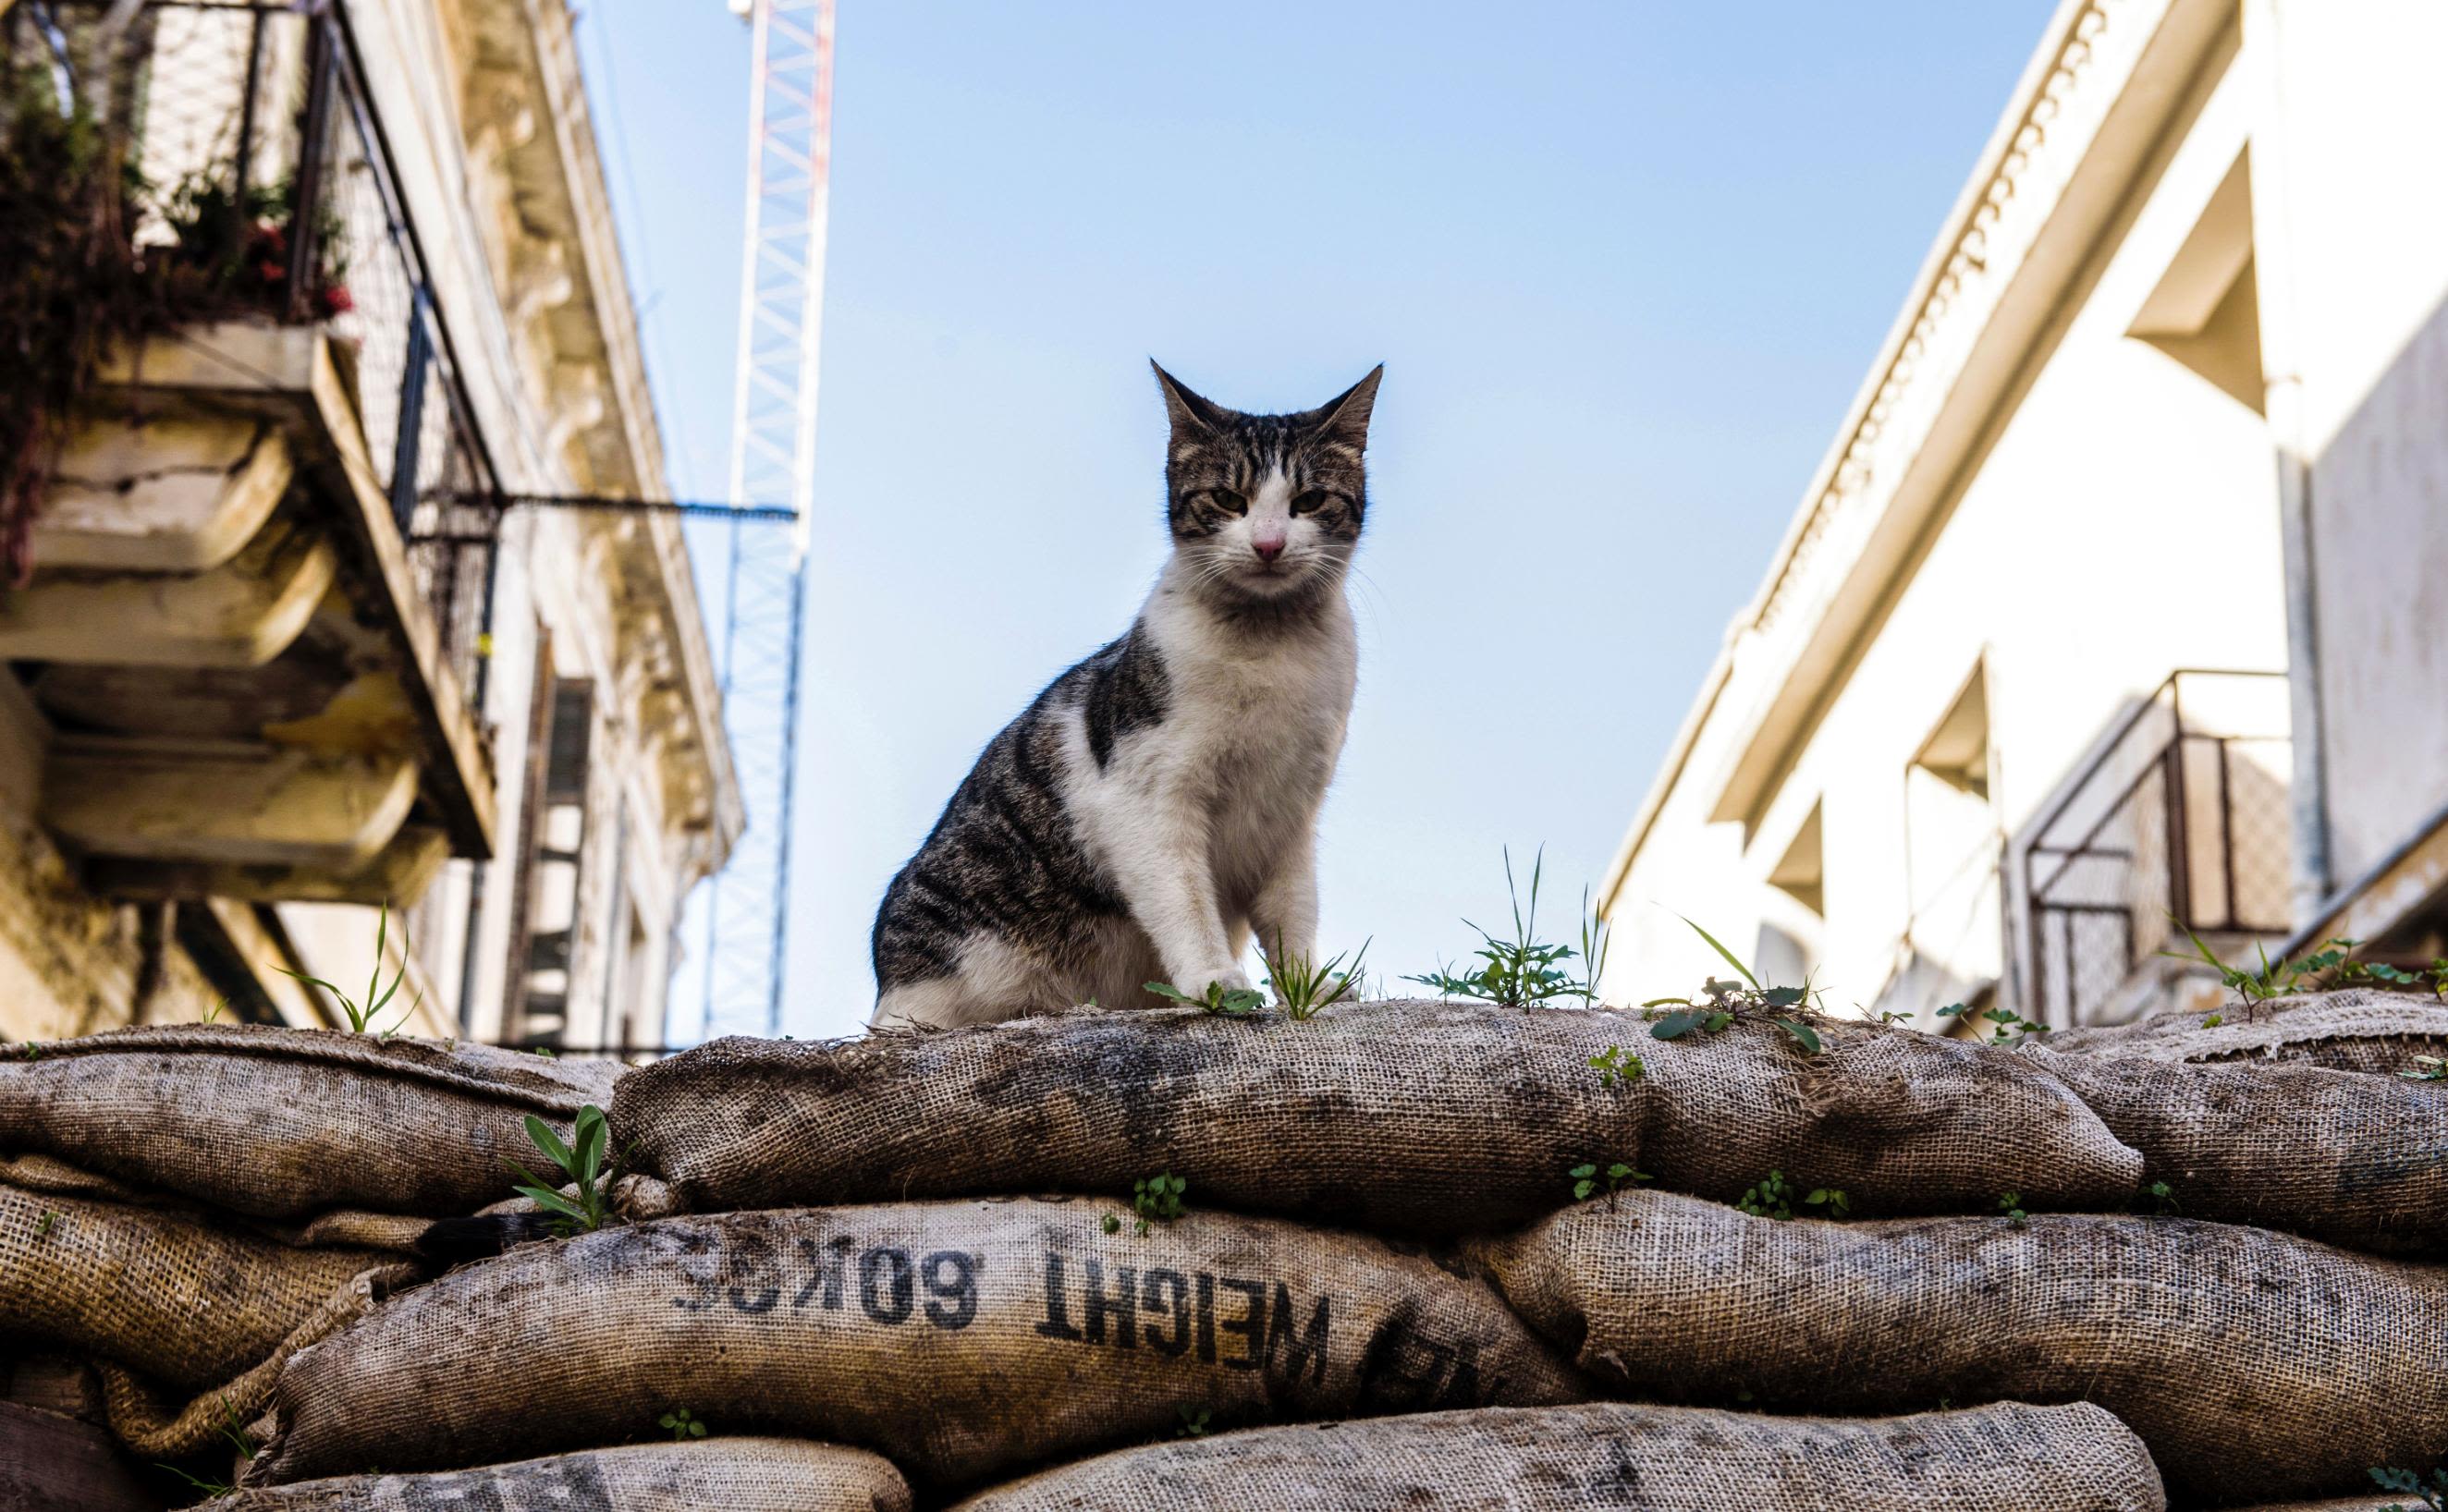 The case against cats: Why Australia has declared war on feral felines | CNN